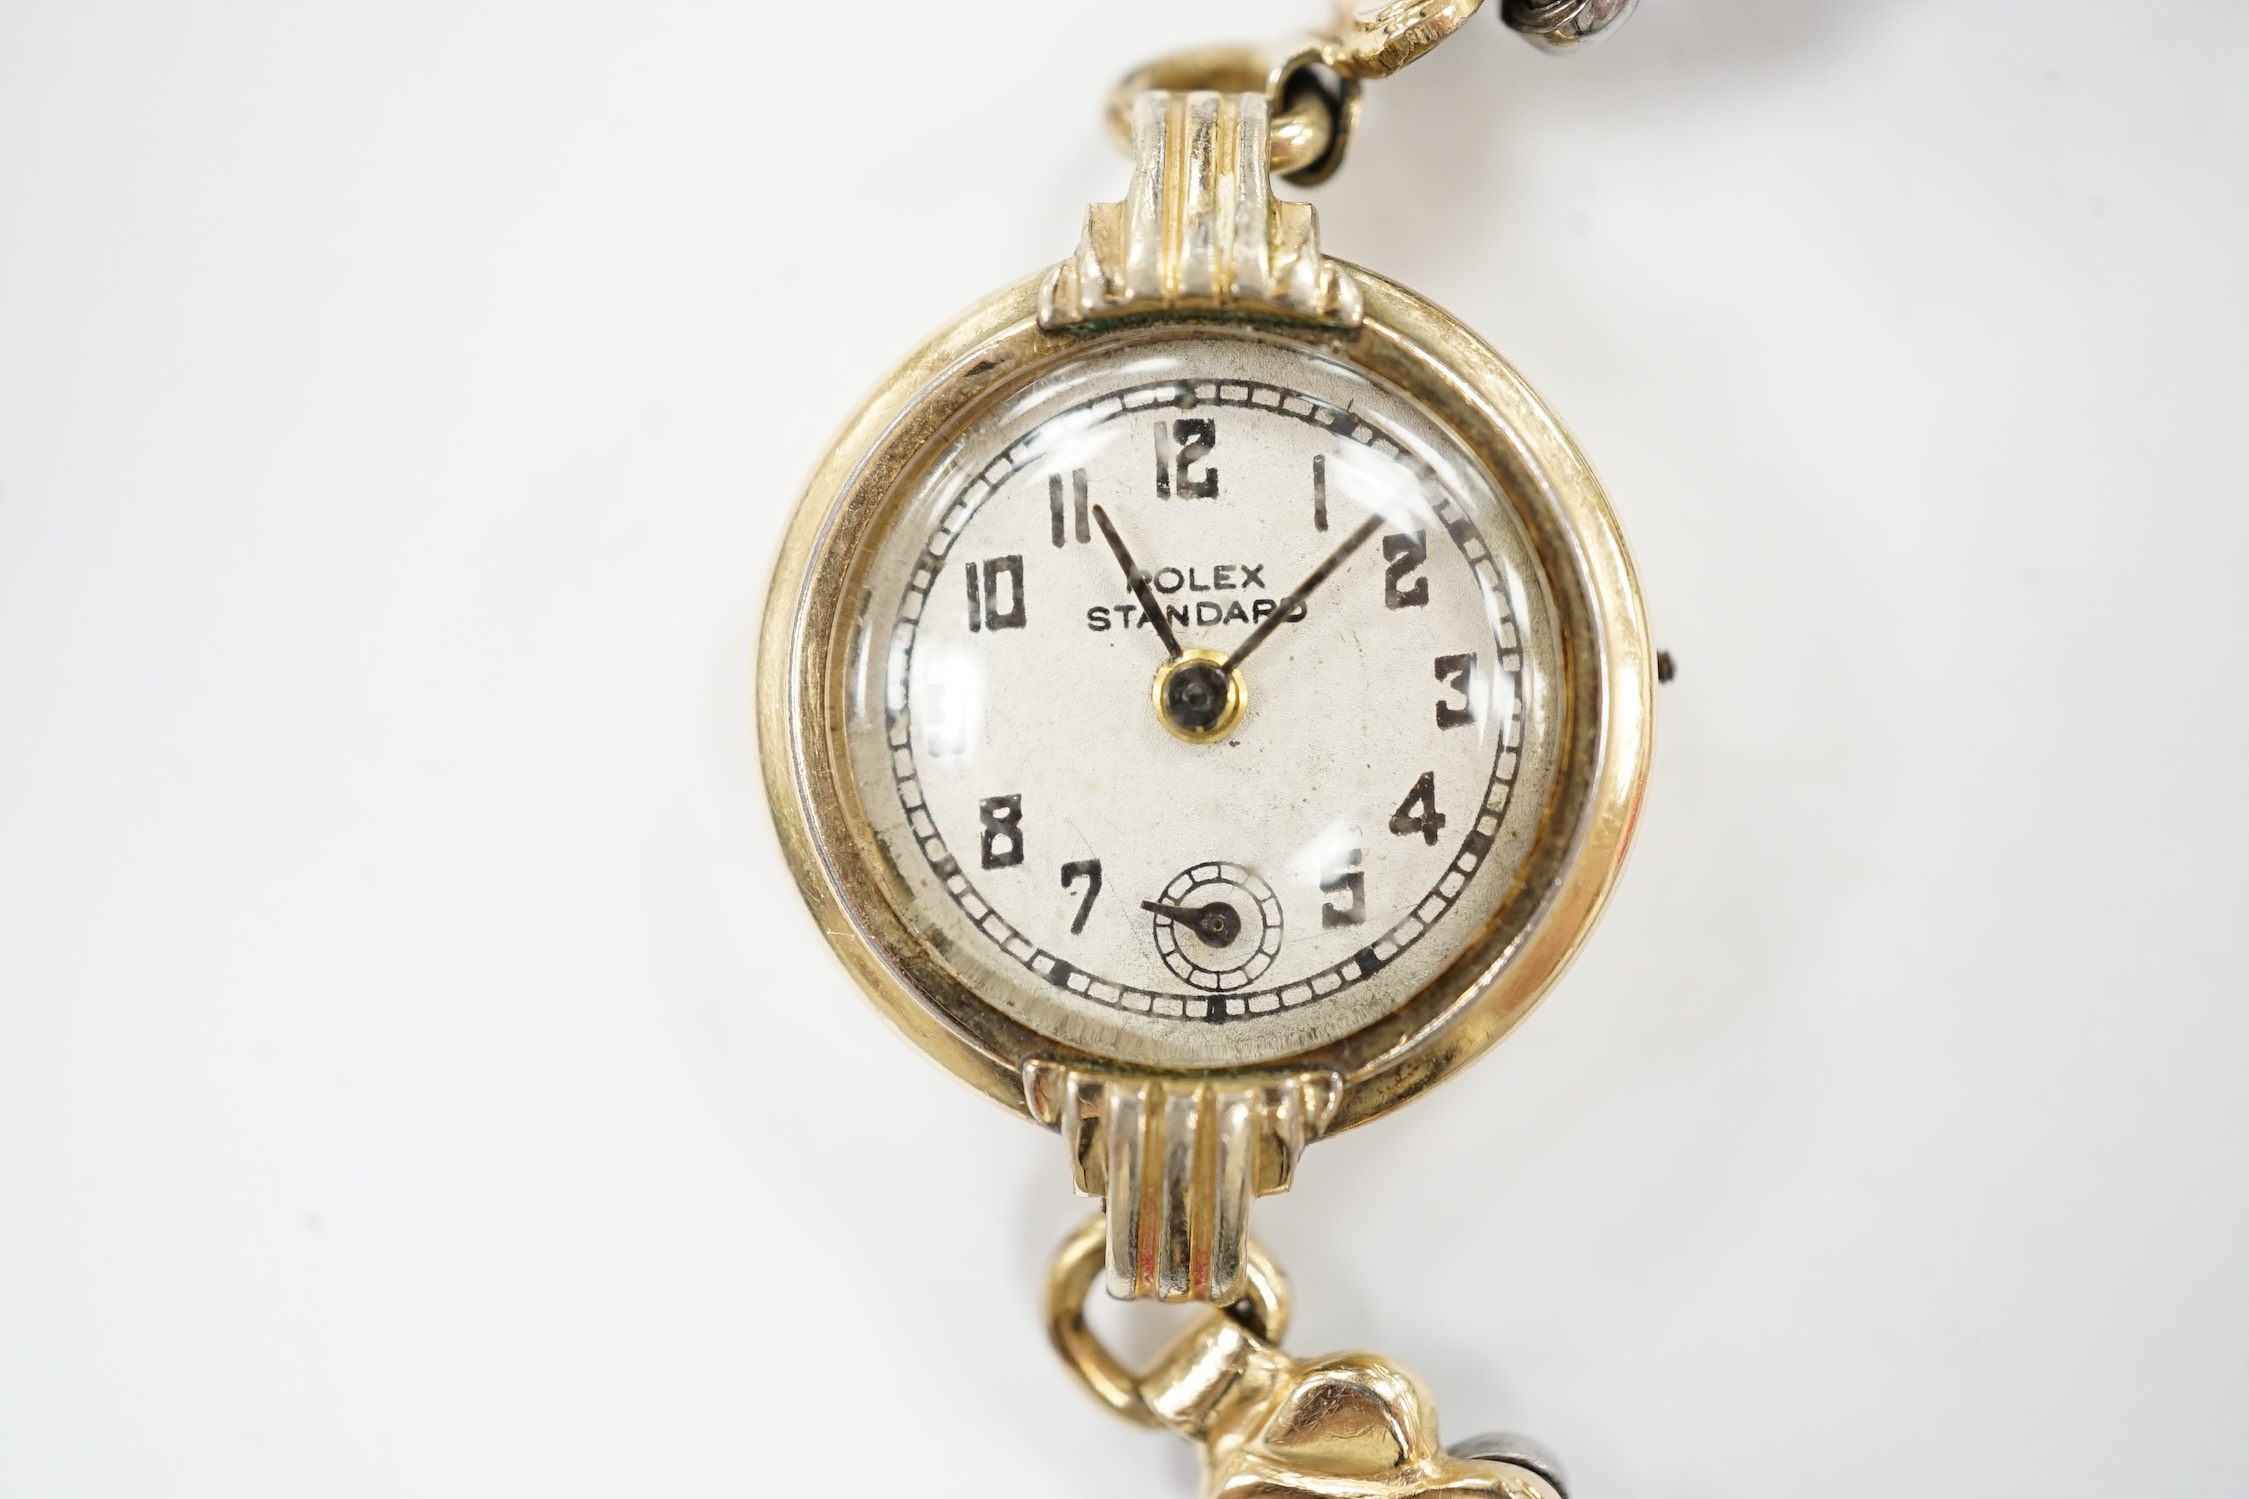 A lady's gilt metal manual wind wrist watch, the dial inscribed 'Rolex Standard', movement unsigned and no winding crown, on an associated flexible link bracelet. Condition - poor